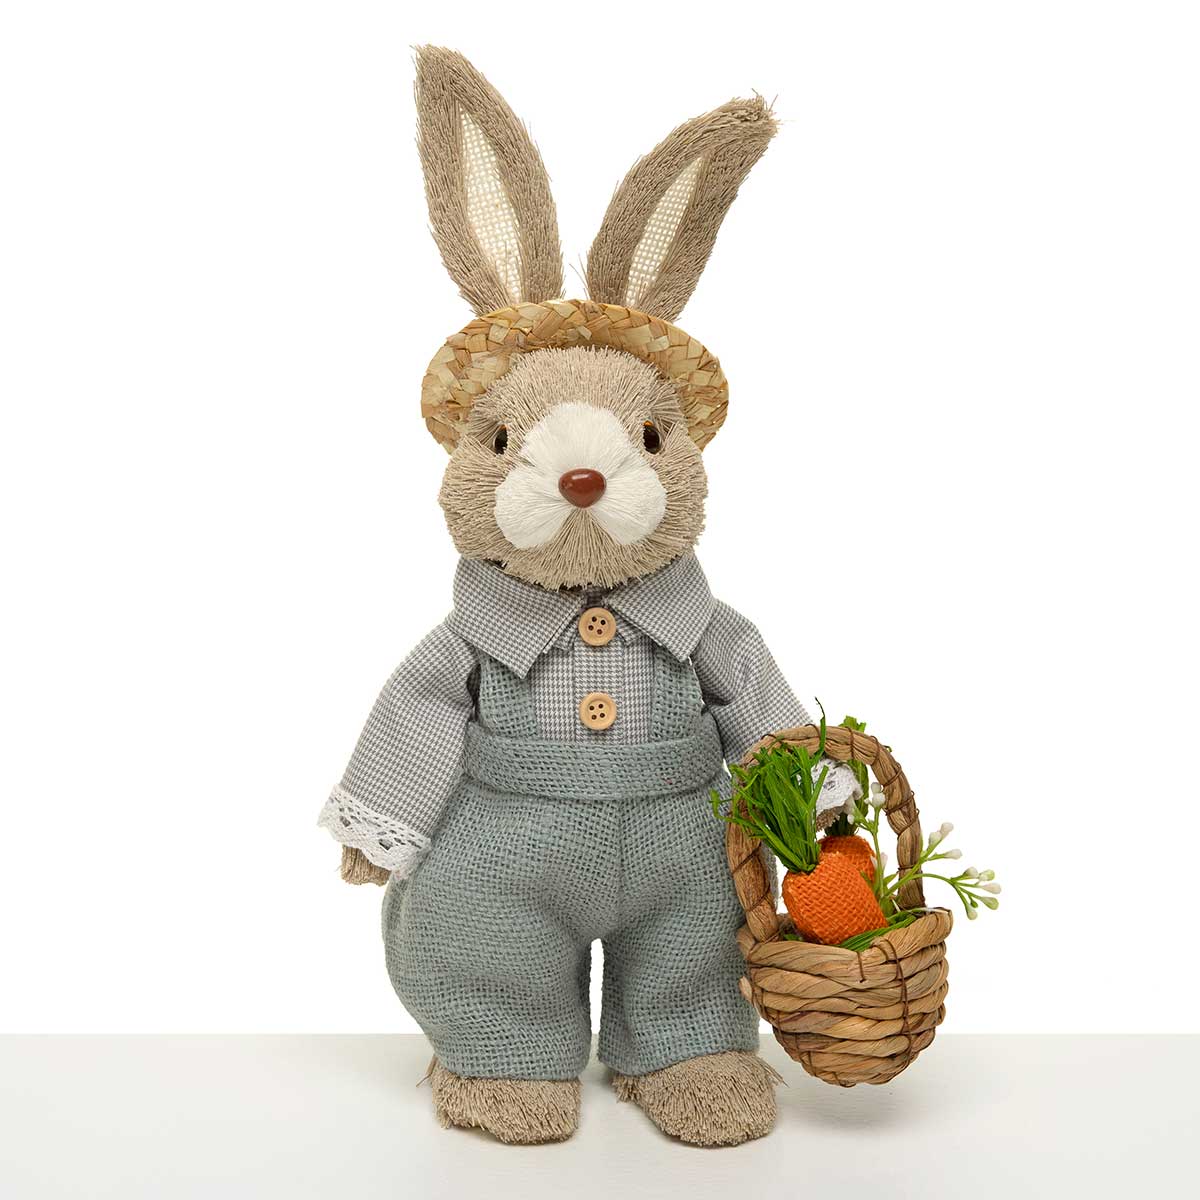 BUNNY FLOPSY WITH CARROT BASKET 7.5IN X 4.75IN X 13.75IN SISAL